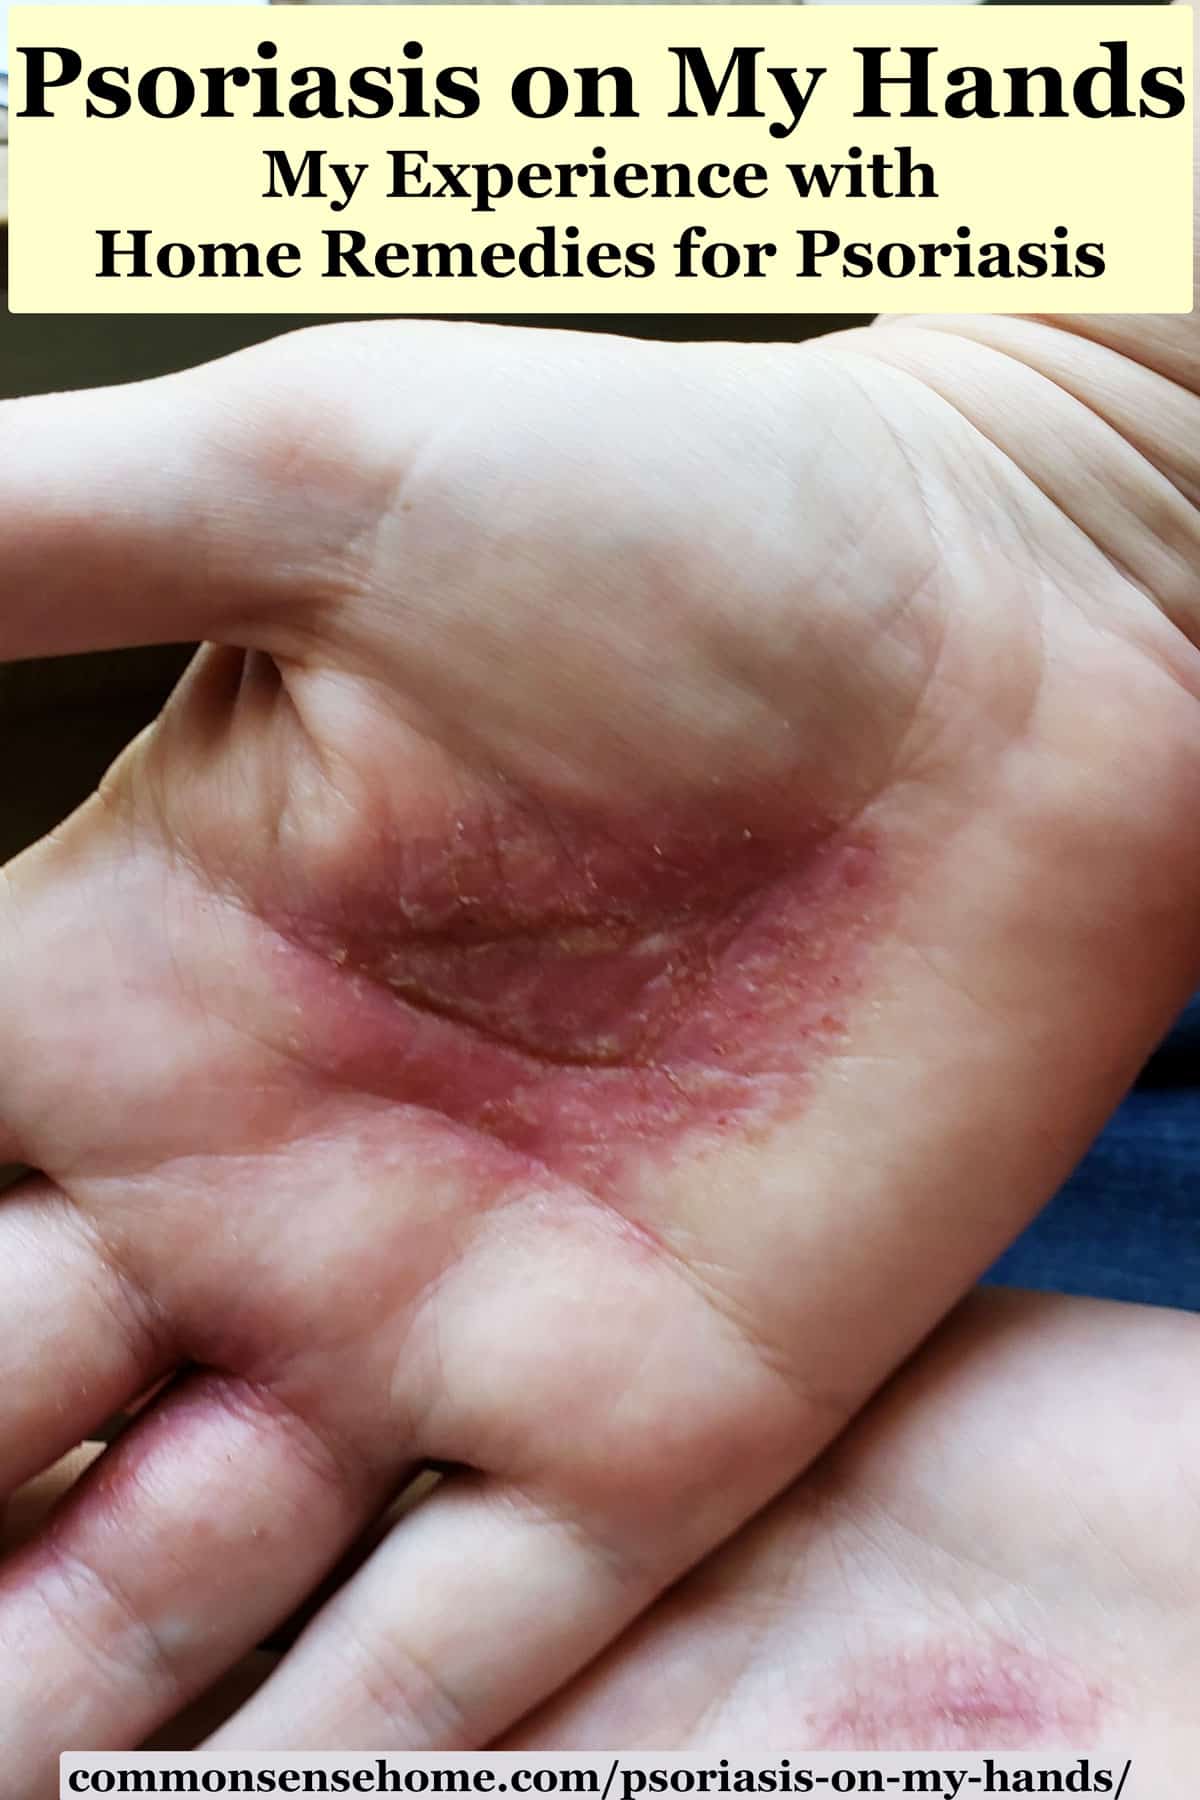 Psoriasis on My Hands